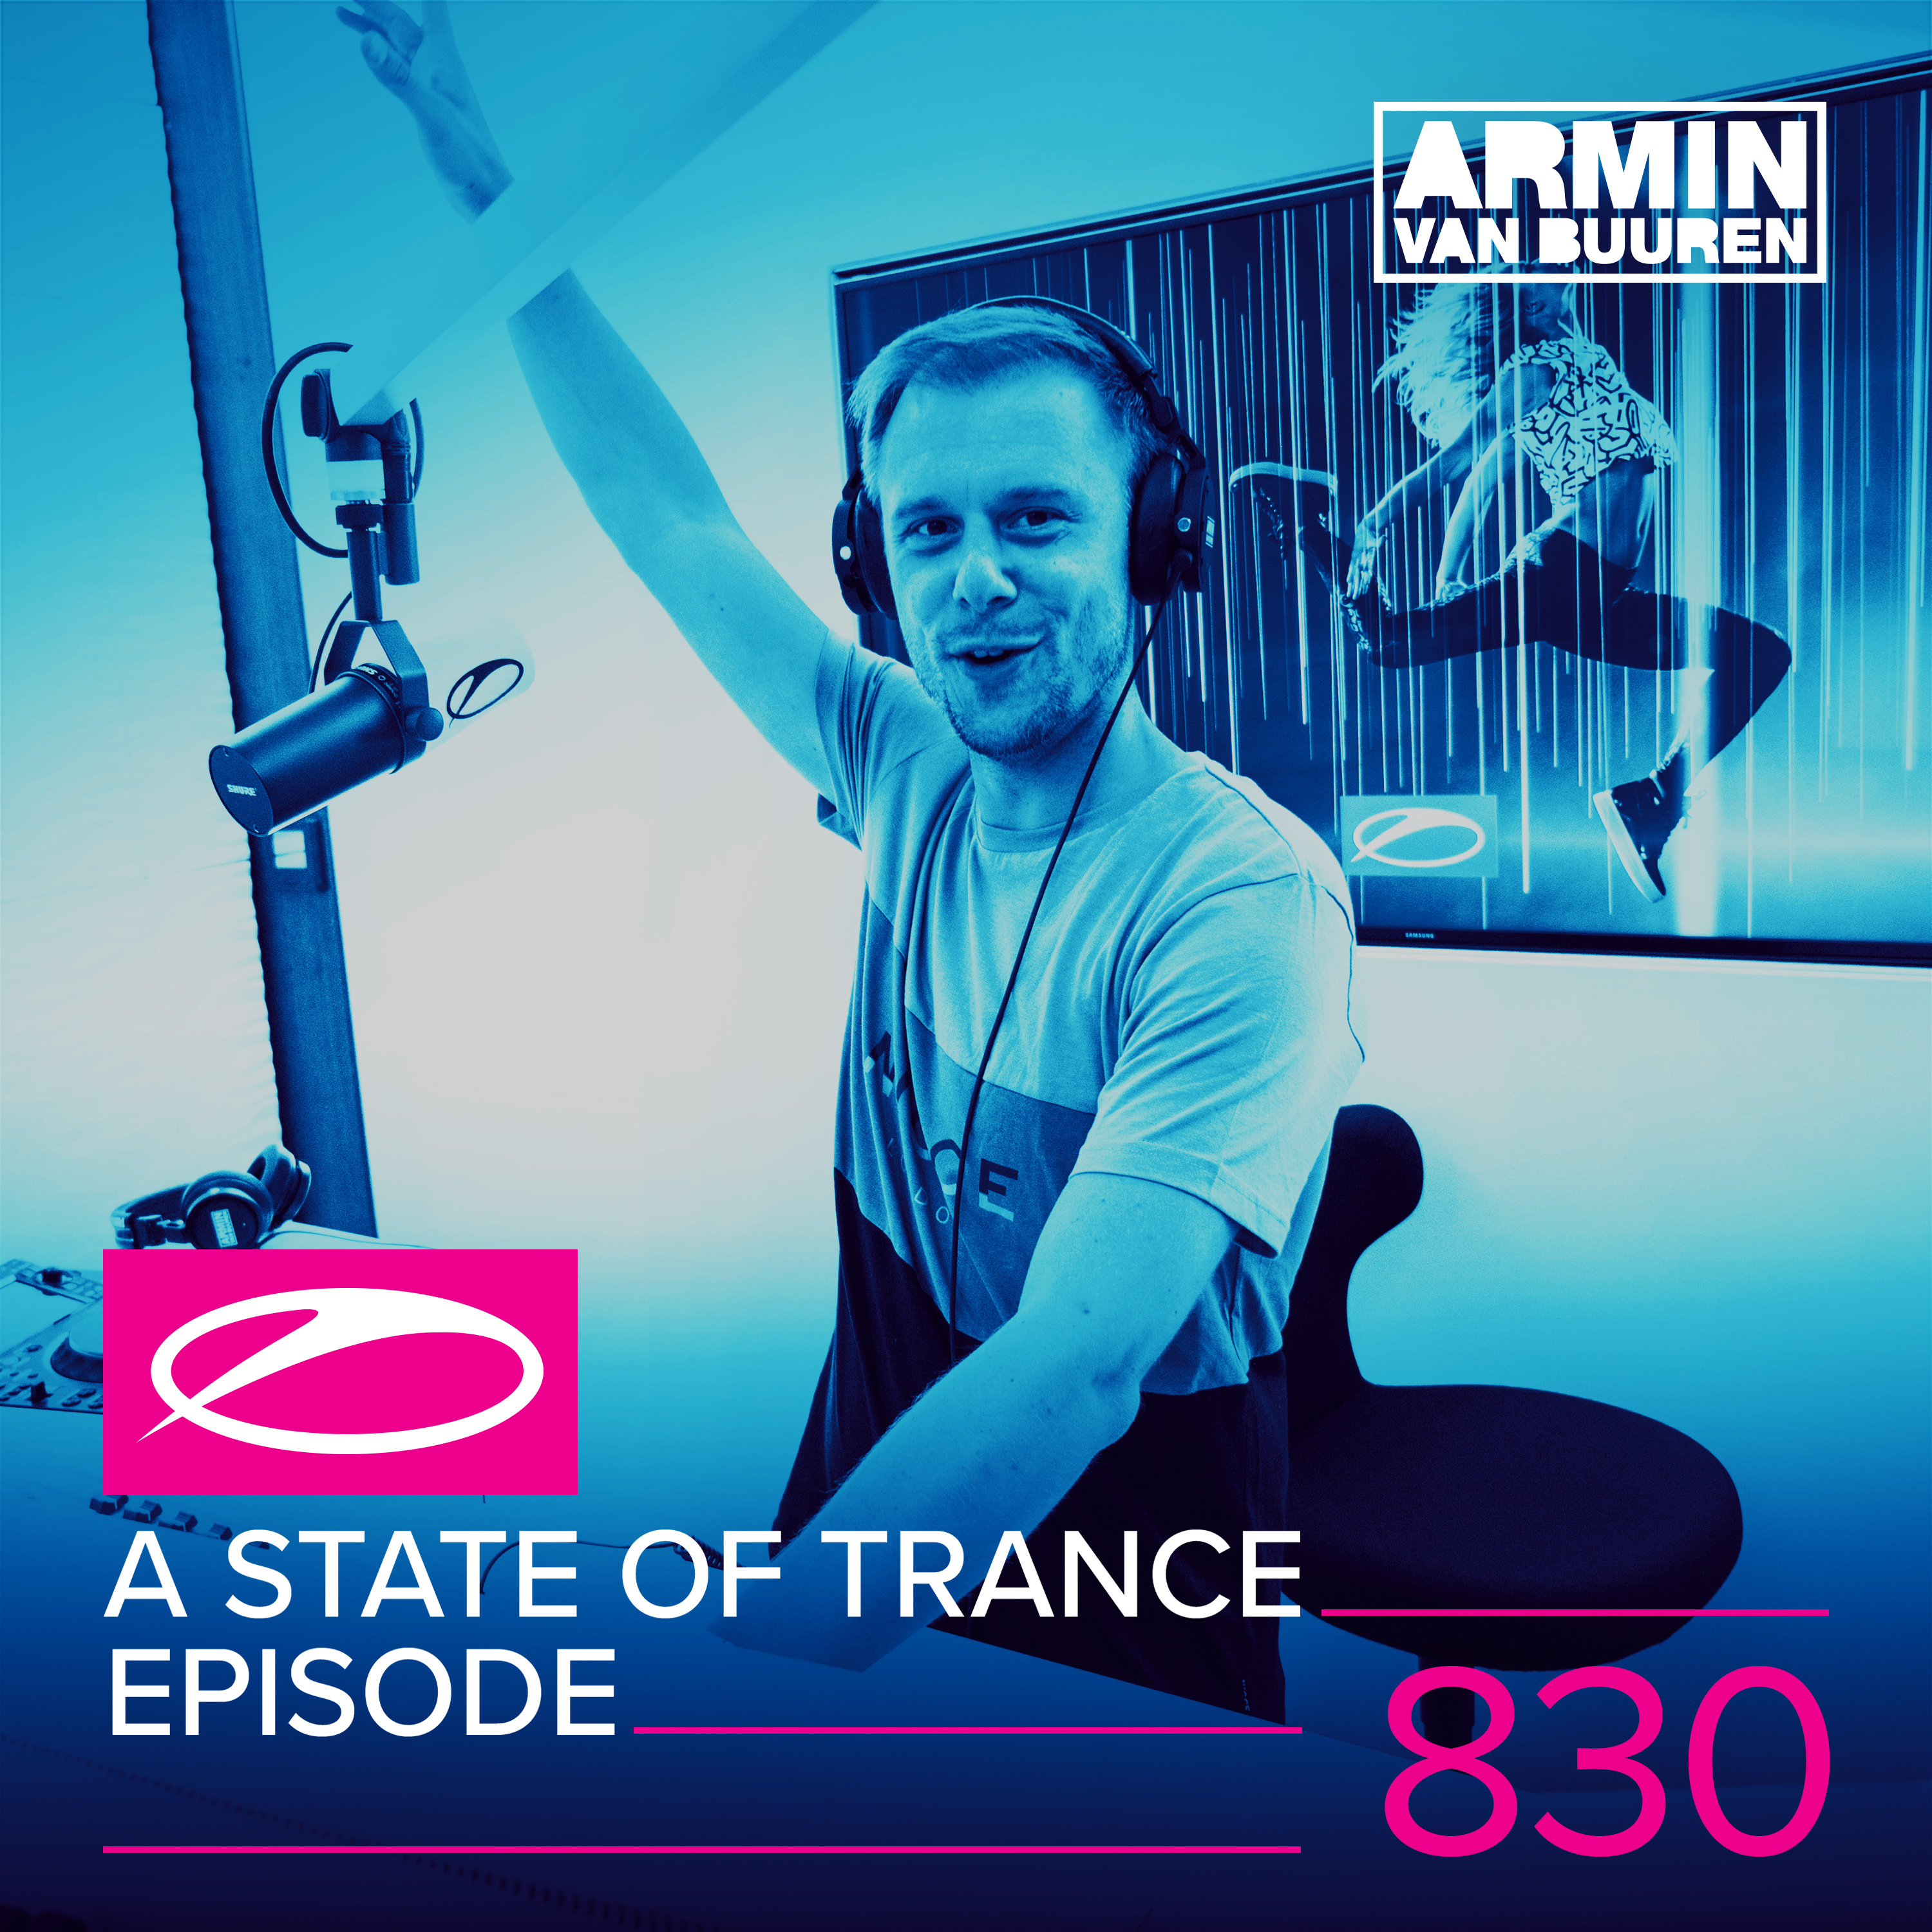 Last To Leave (ASOT 830)